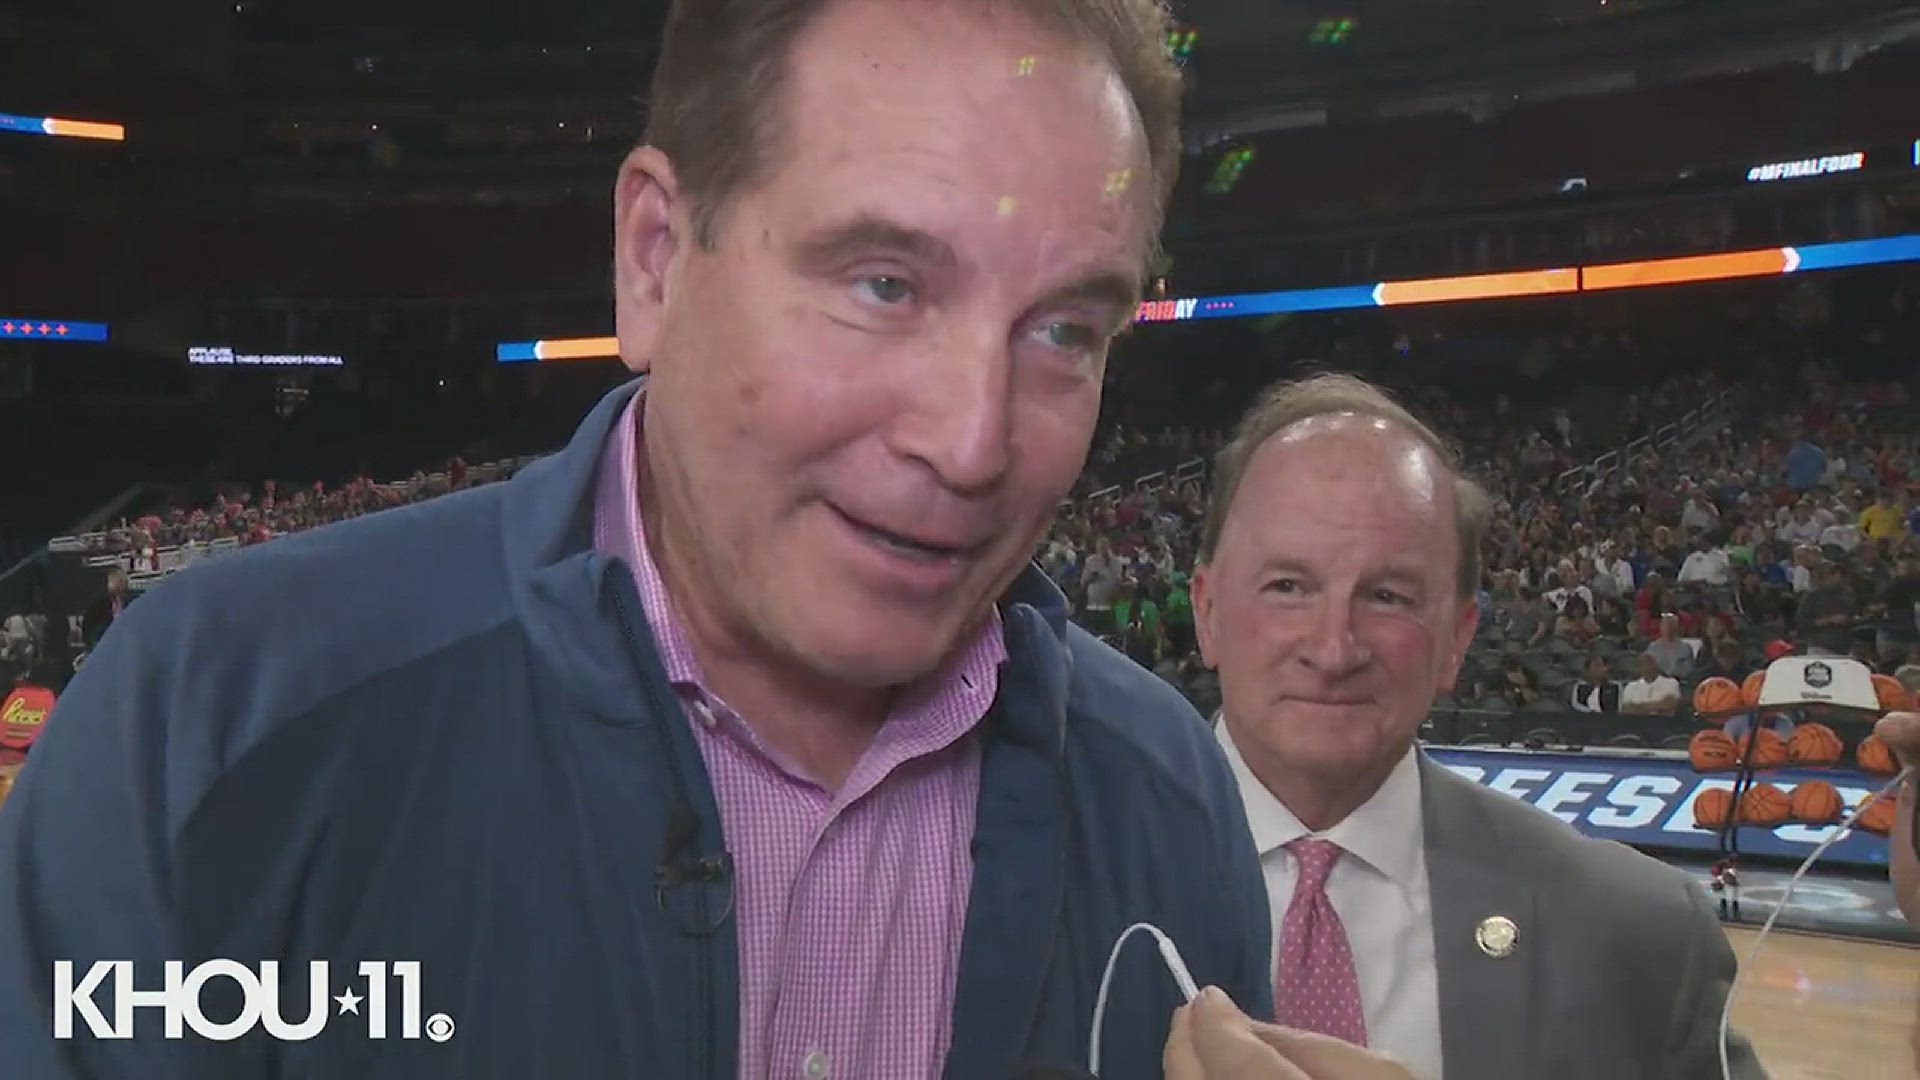 Jim Nantz, who will call his last Final Four in Houston, talks about getting a key to the city.